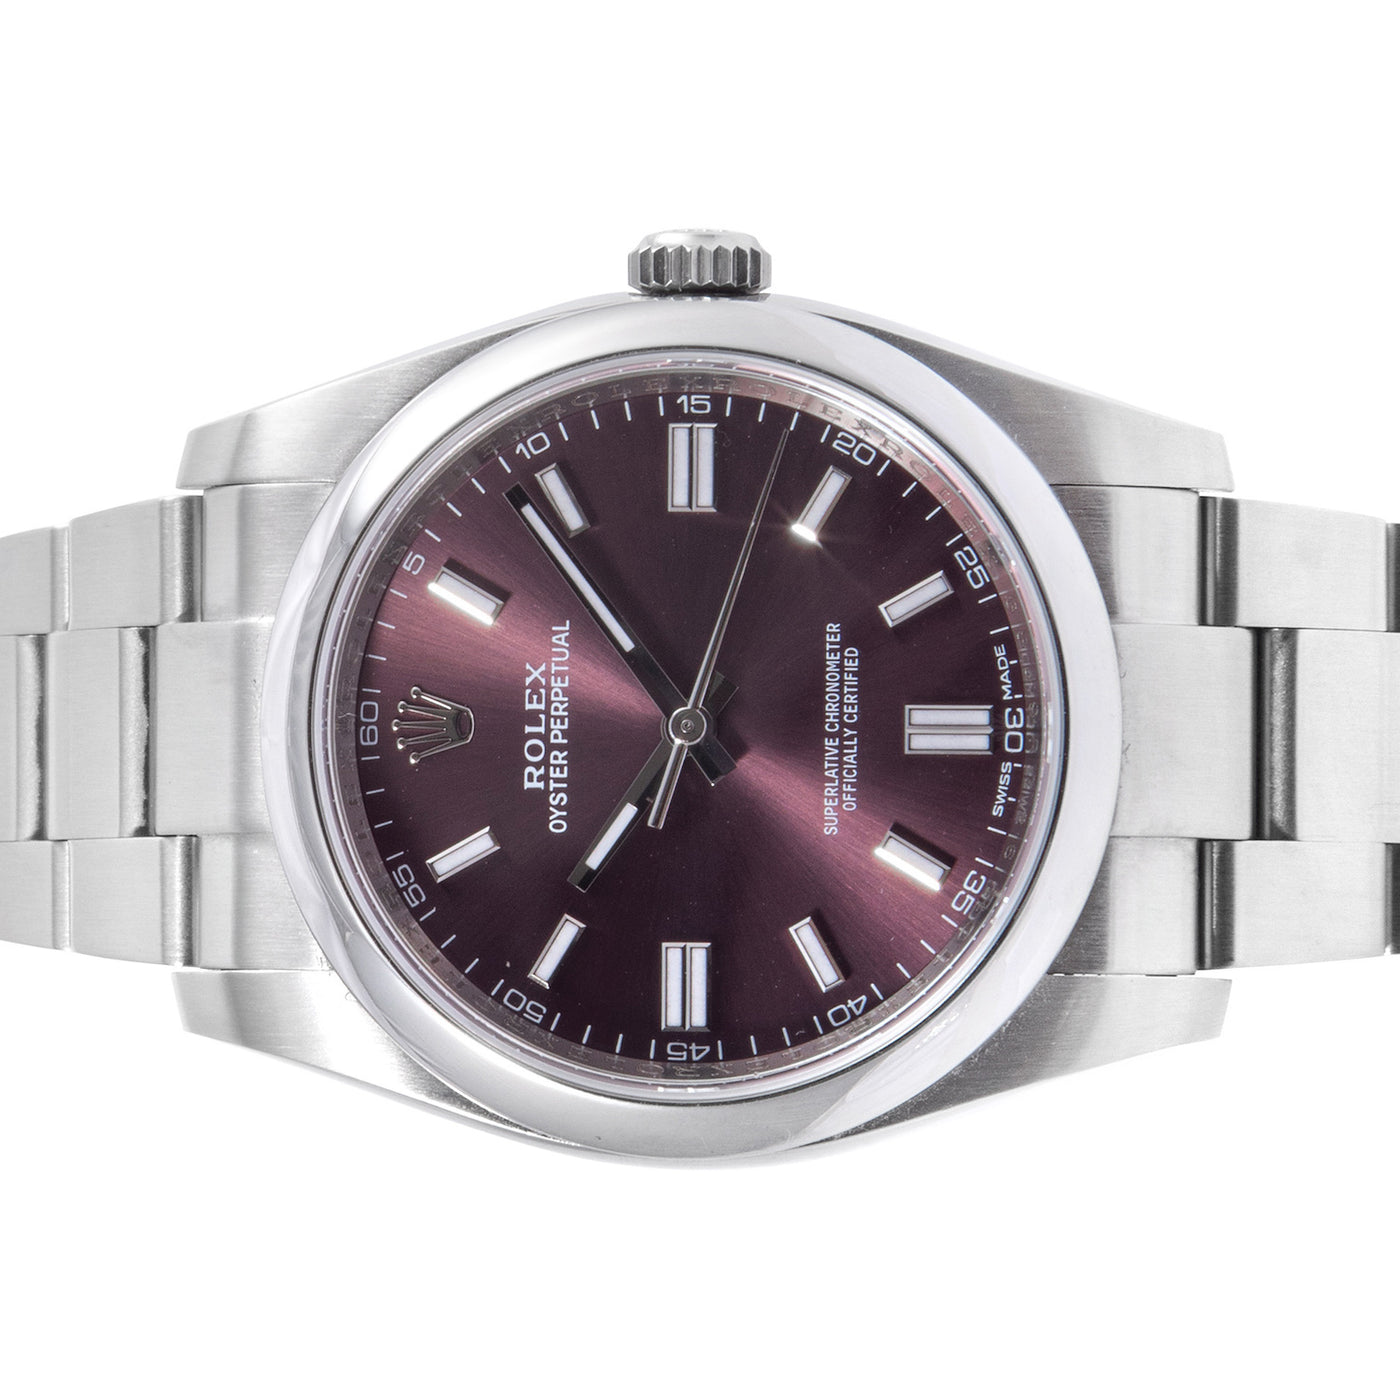 Rolex Oyster Perpetual 116000 